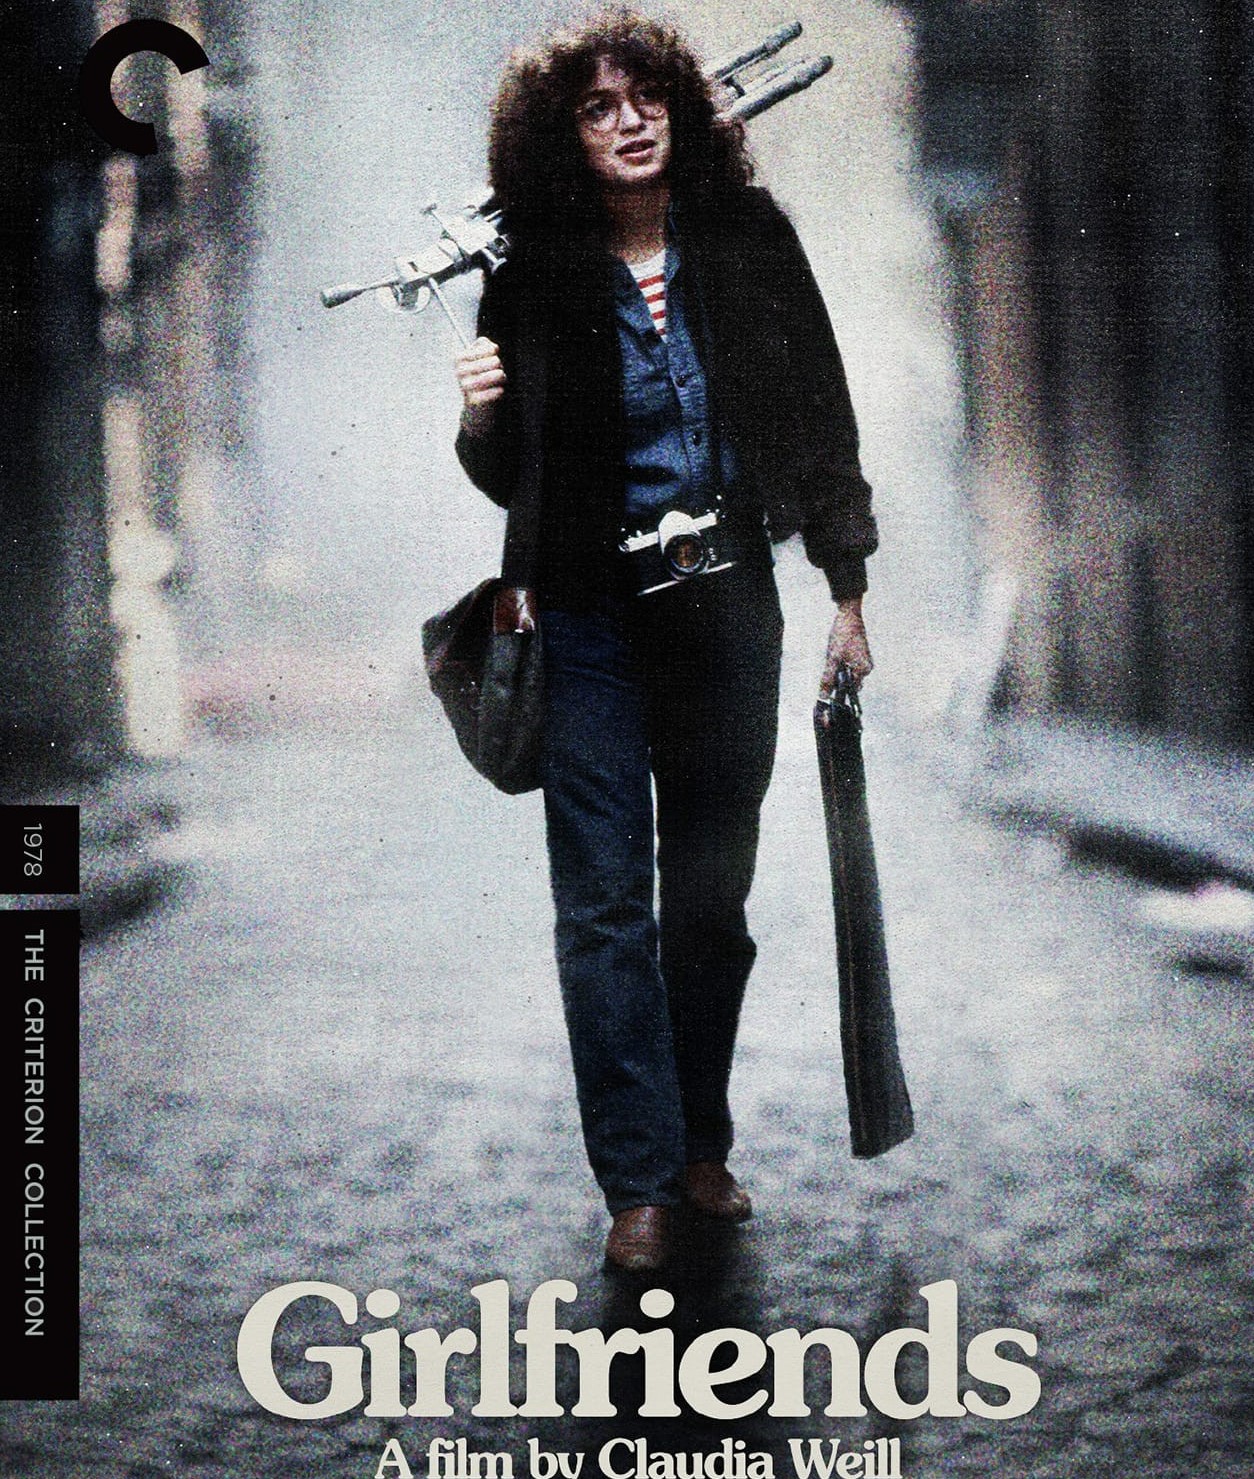 Blu-Ray Review: Girlfriends [Criterion Collection, 2020] (Claudia Weill, 1978)